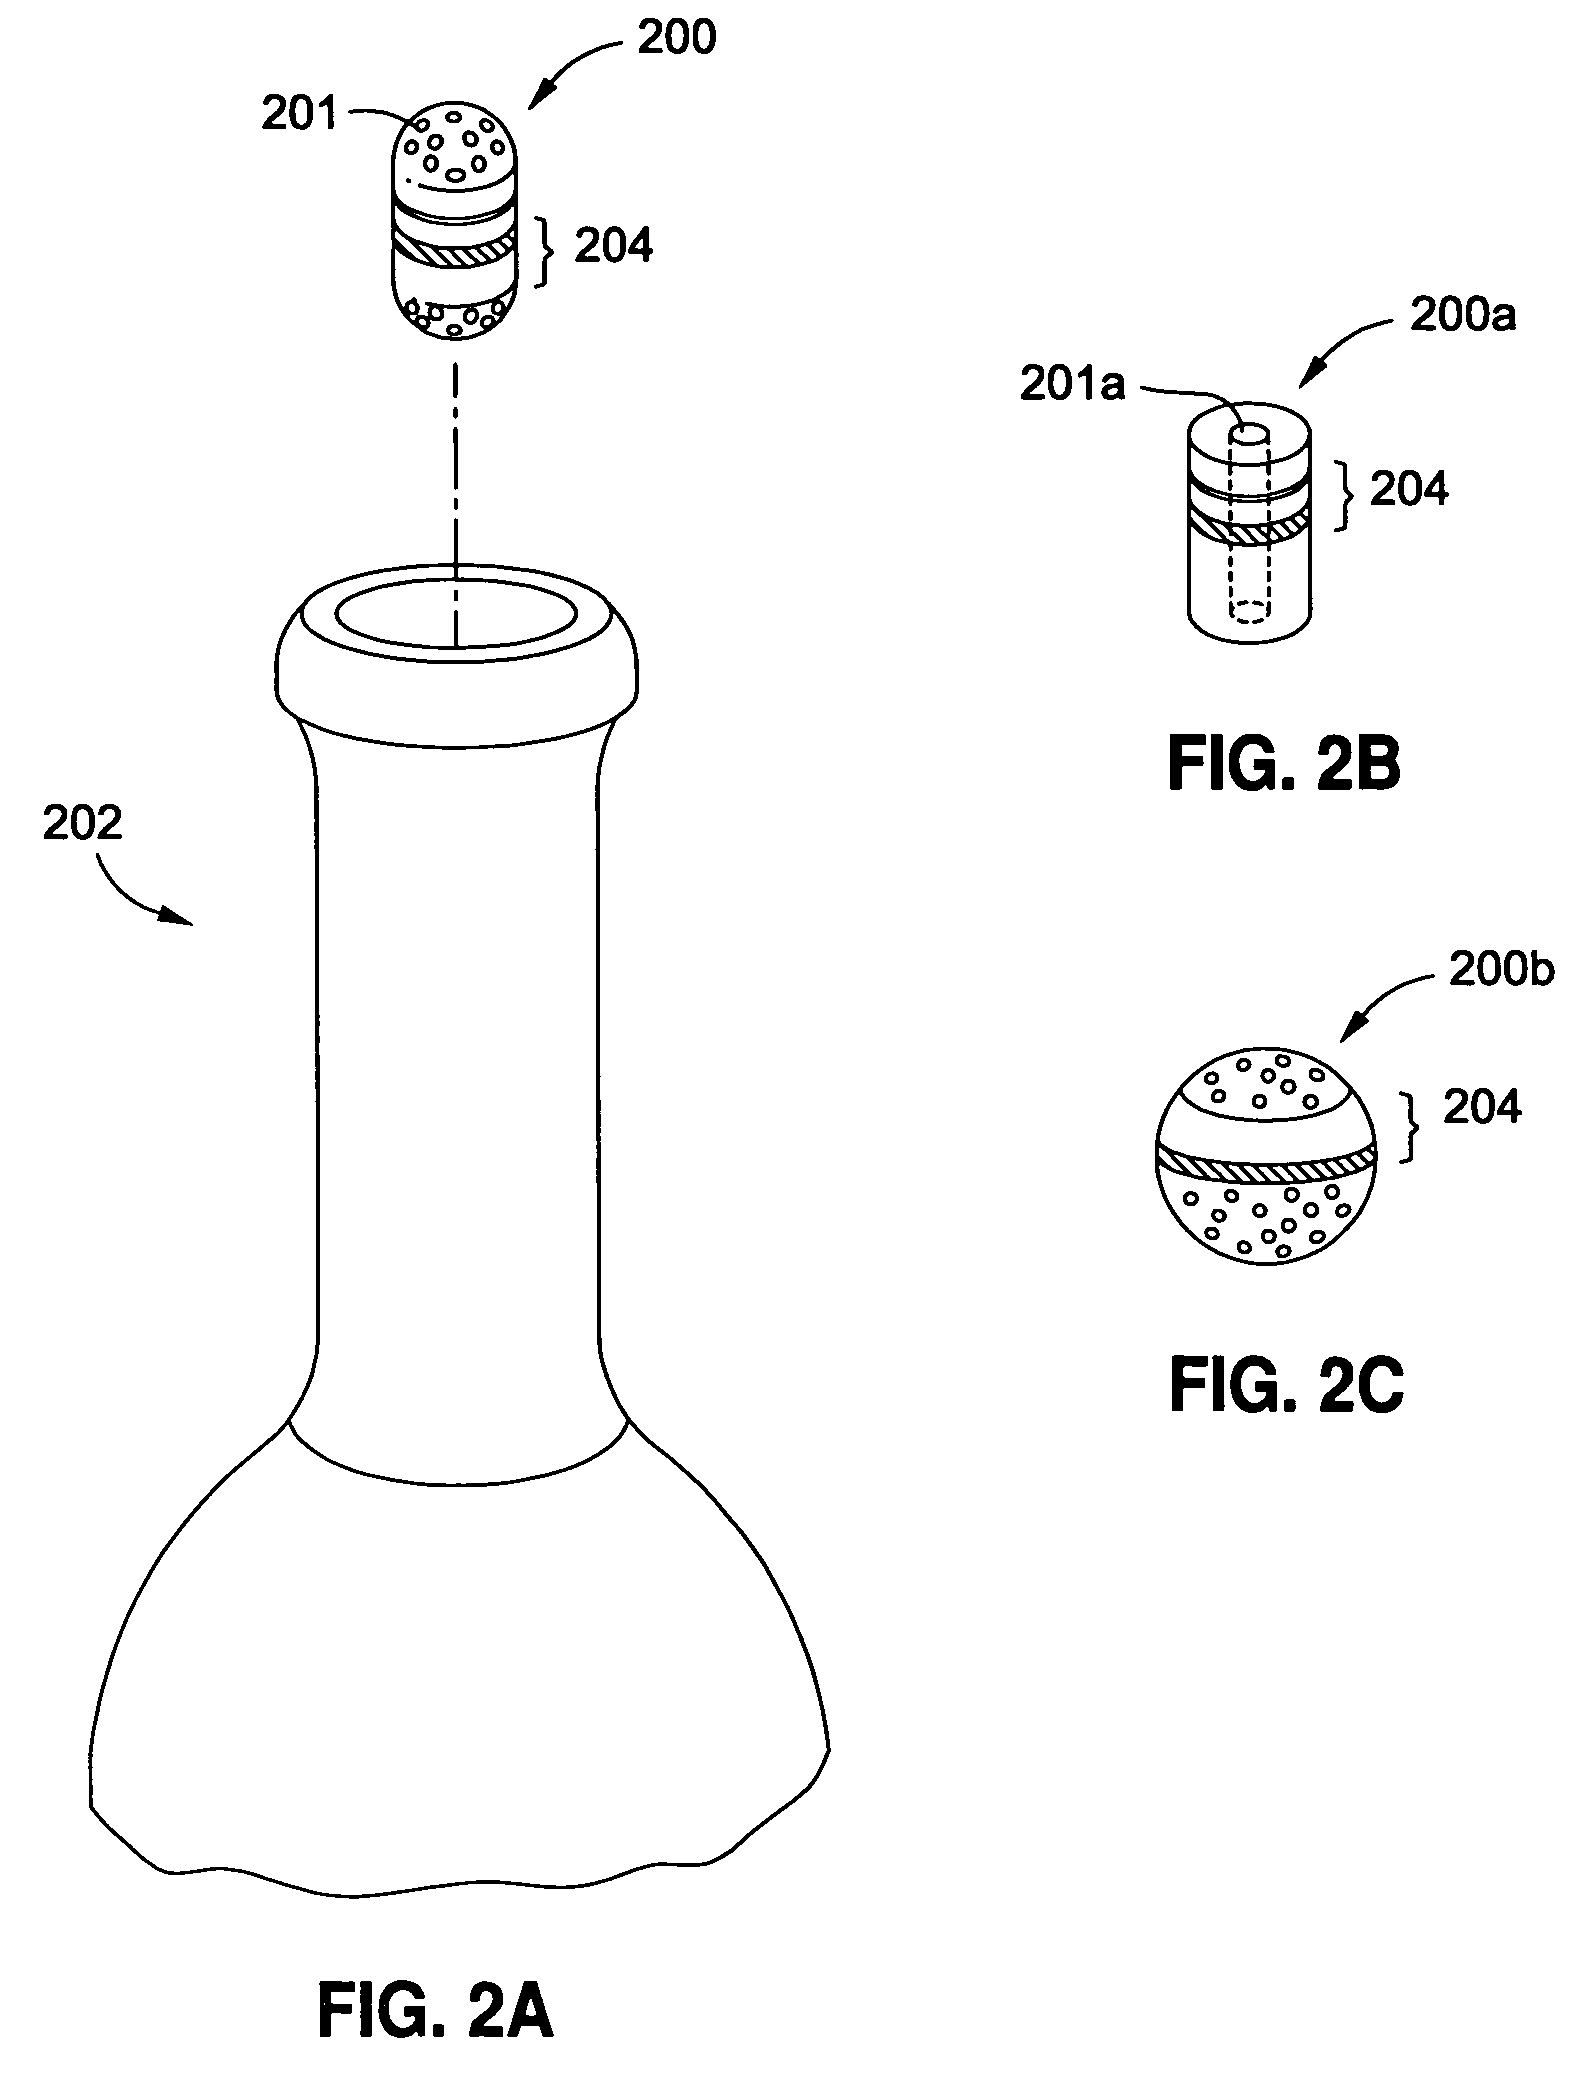 Method and apparatus for altering the composition of a beverage